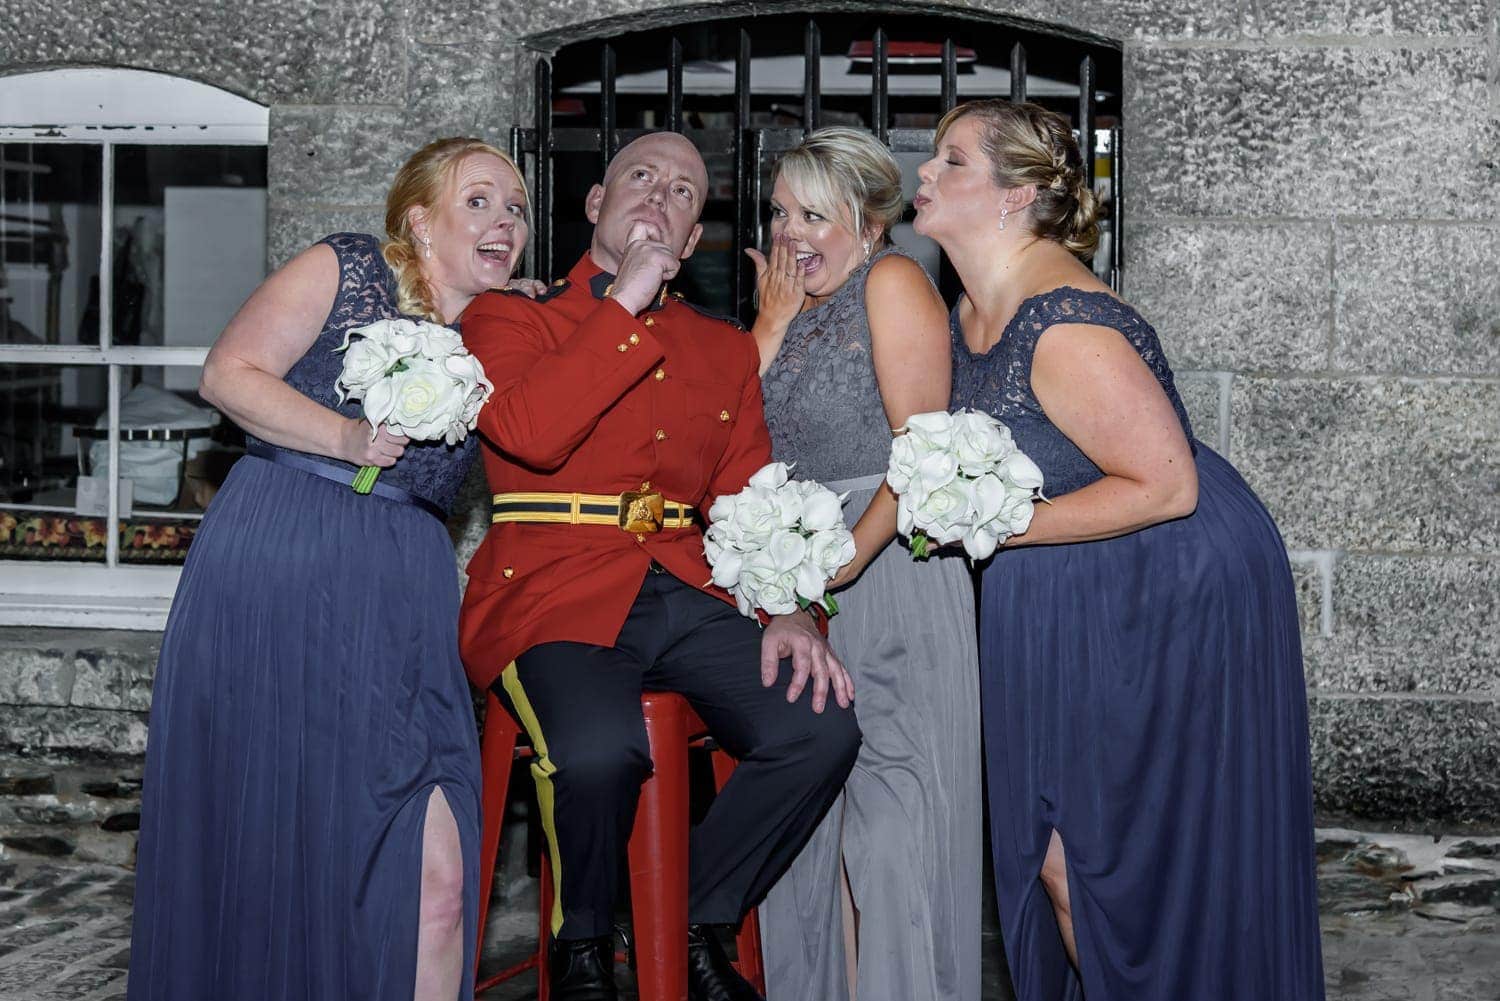 An RCMP groom with bridesmaids photos at Alexander Keiths Brewery in Halifax.